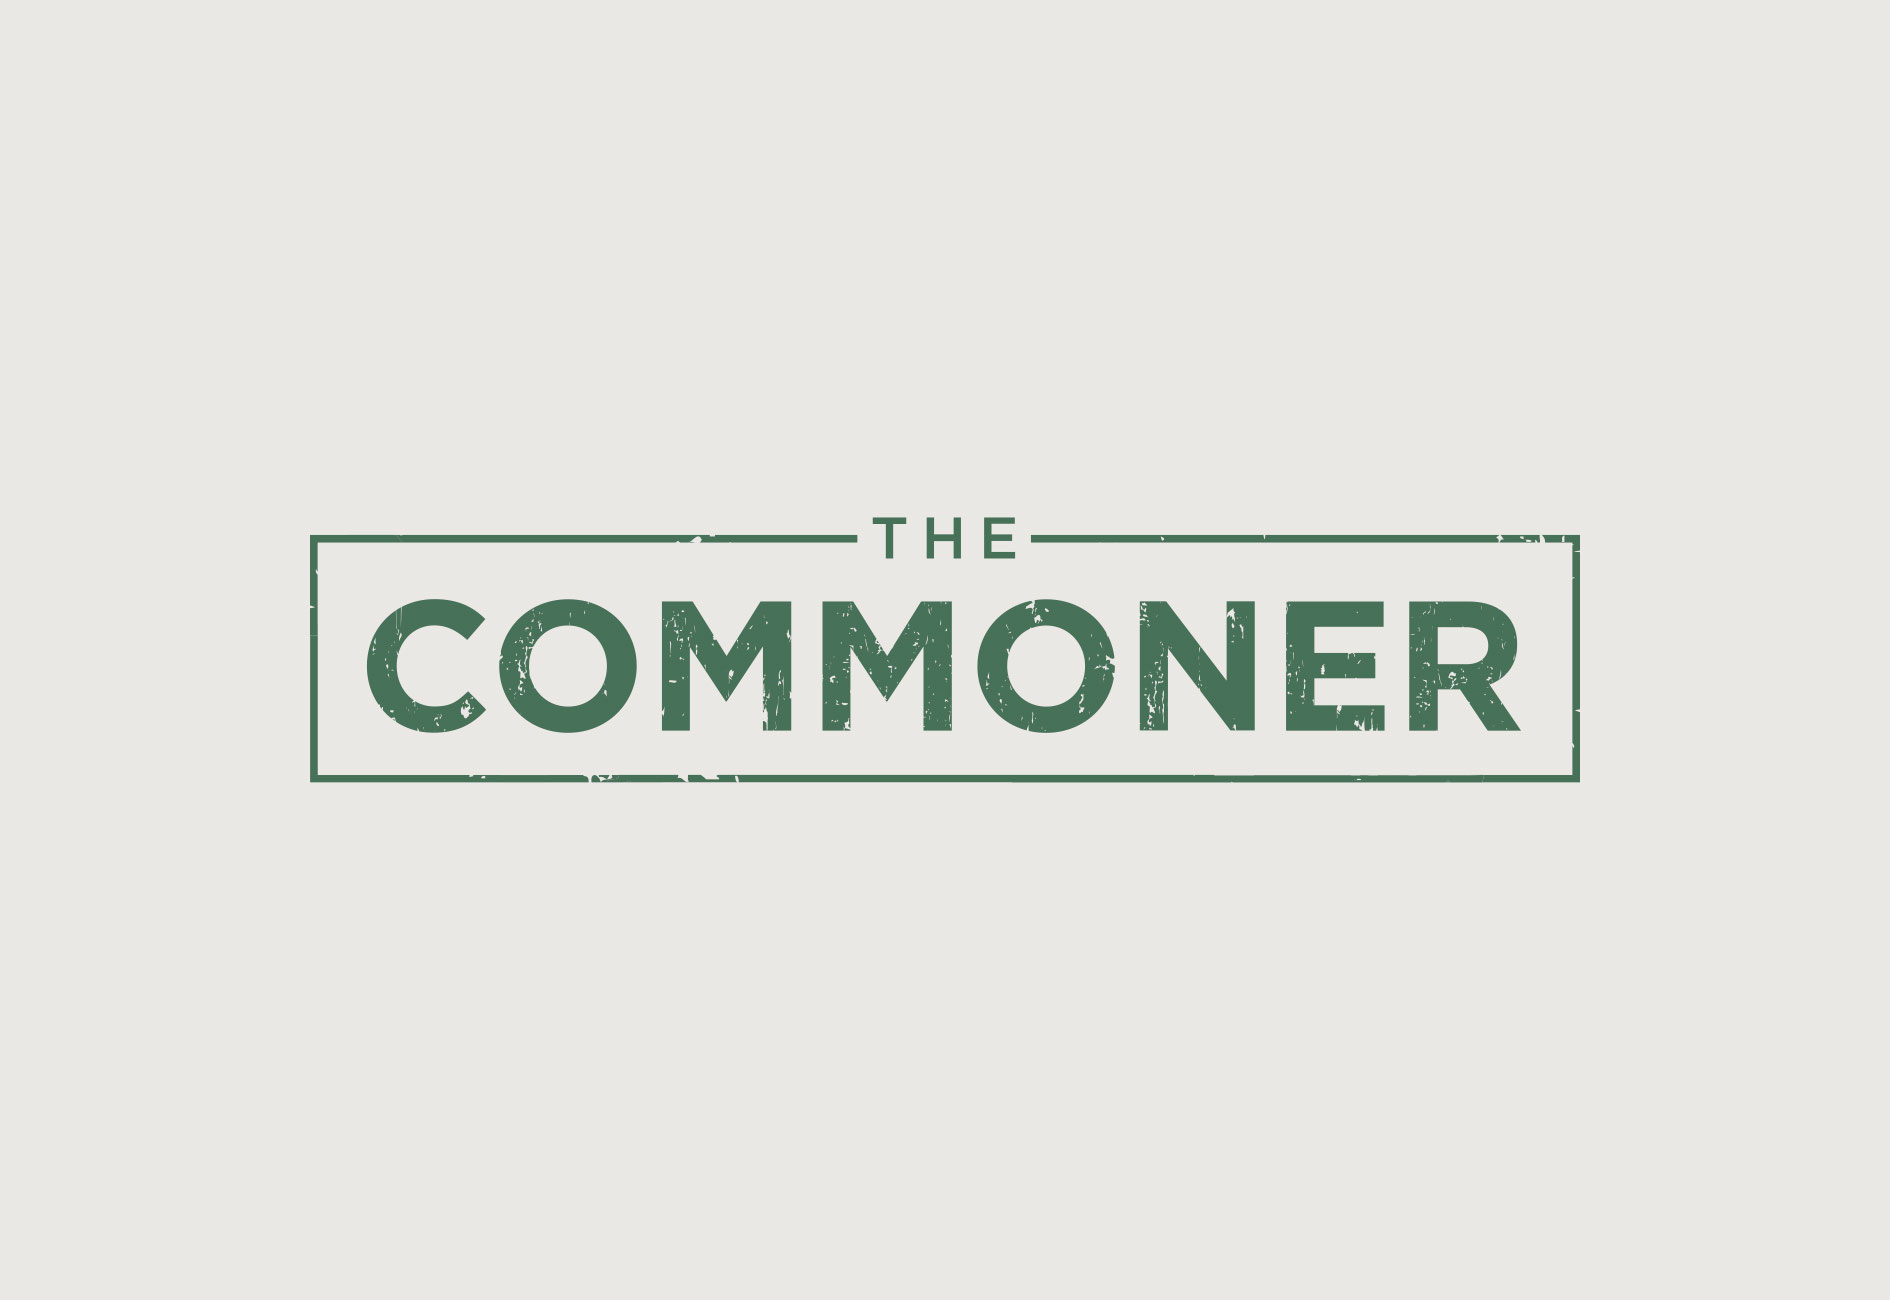 The Commoner designed by MARKZEFF